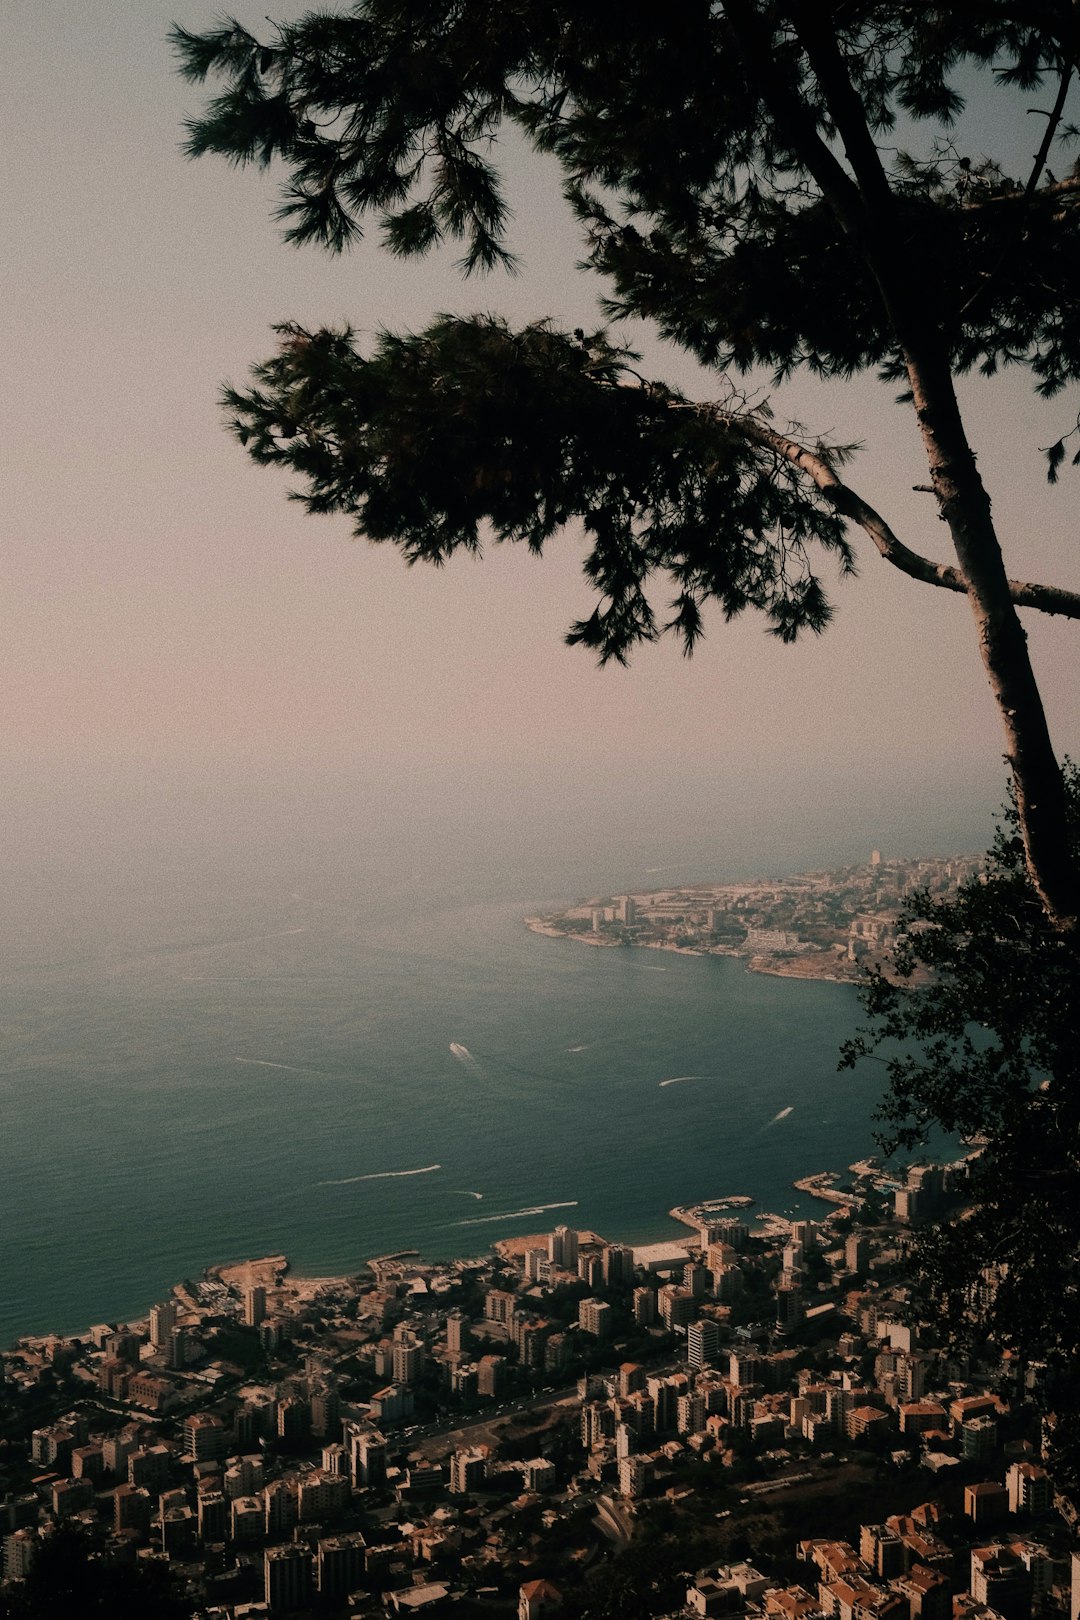 Travel Tips and Stories of Harissa in Lebanon